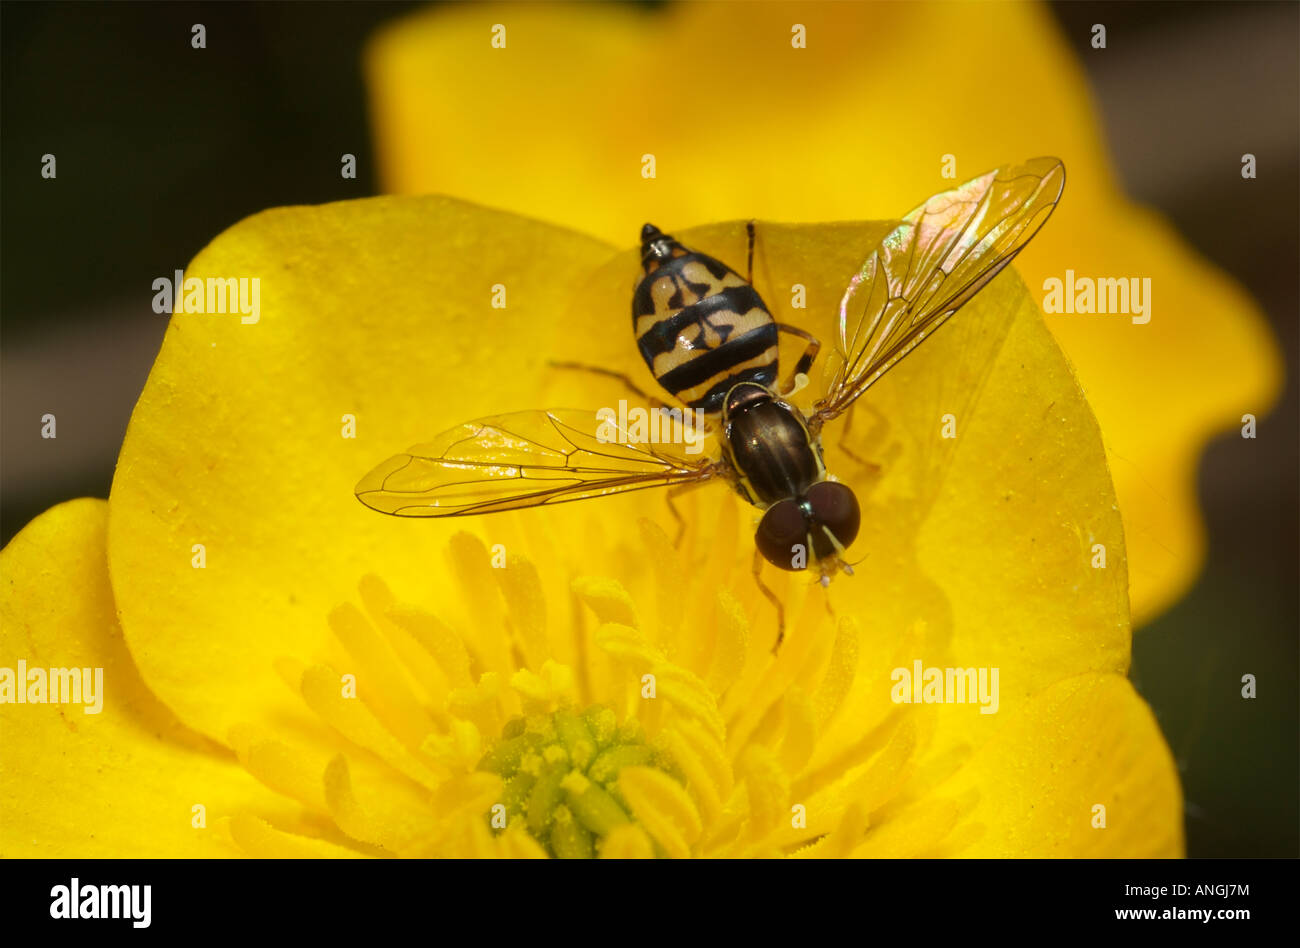 Germinating fly Toxomerus geminatus syrphid fly on a yellow flower. Stock Photo